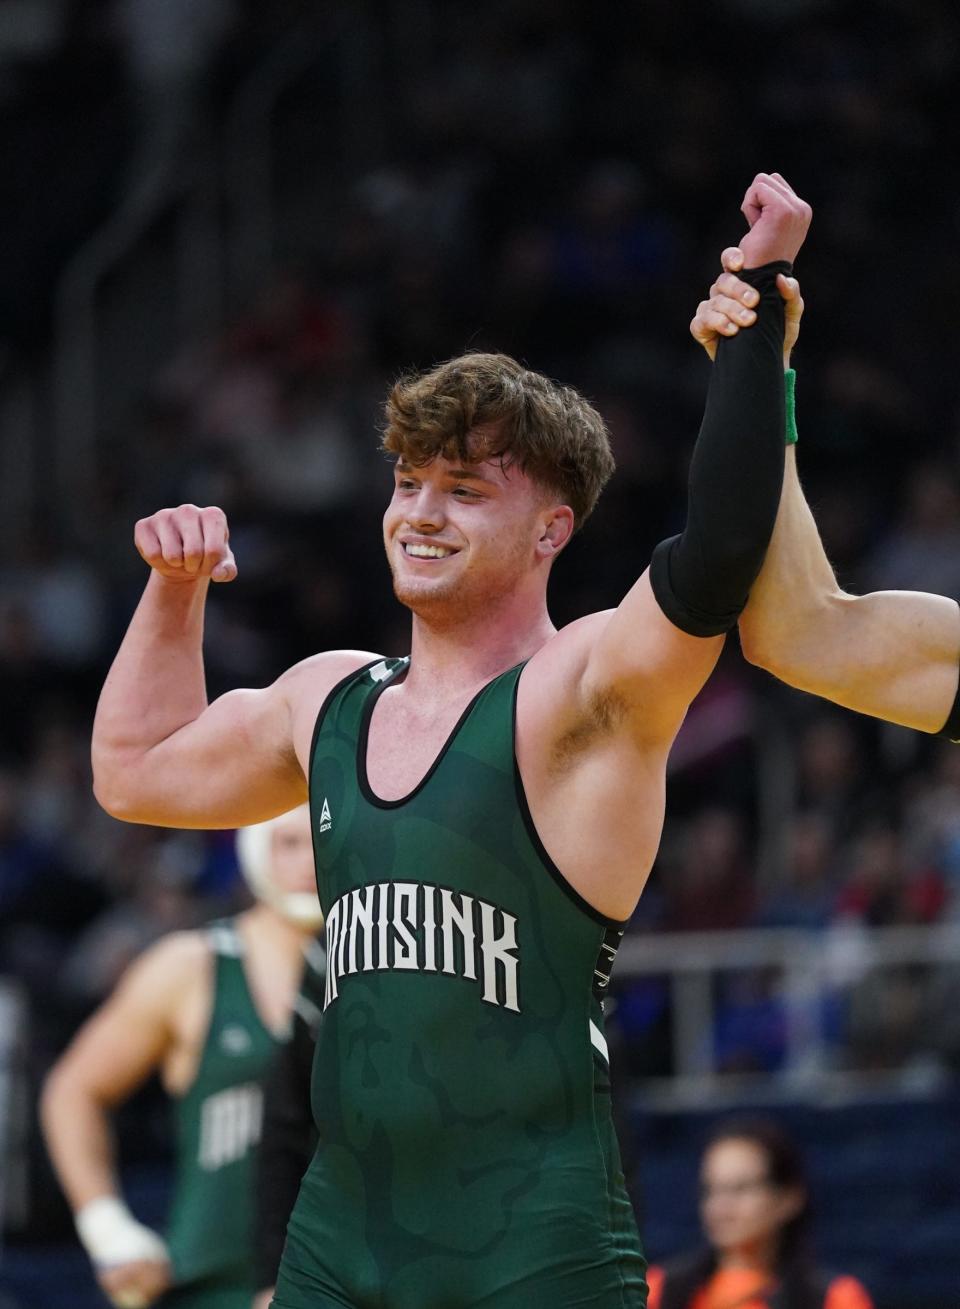 Minisink Valley's Zack Ryder has his arm raised in victory after dispatching Hilton's Elijah Diakomihalis in the Division 1 189-pound championship match in Albany on Saturday.